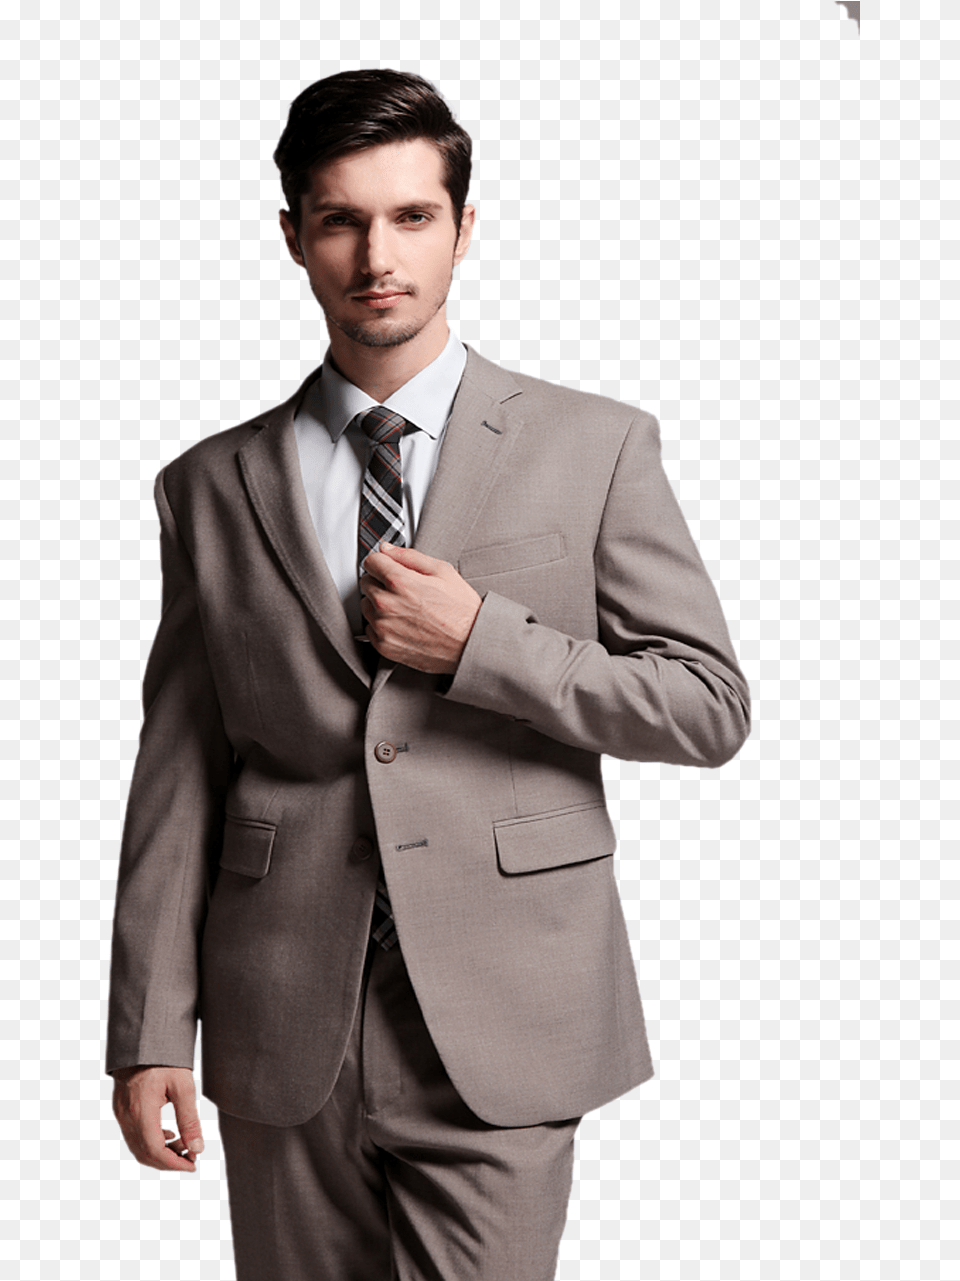 Suit Images Download Man Coat Pant, Tuxedo, Clothing, Formal Wear, Tie Free Png